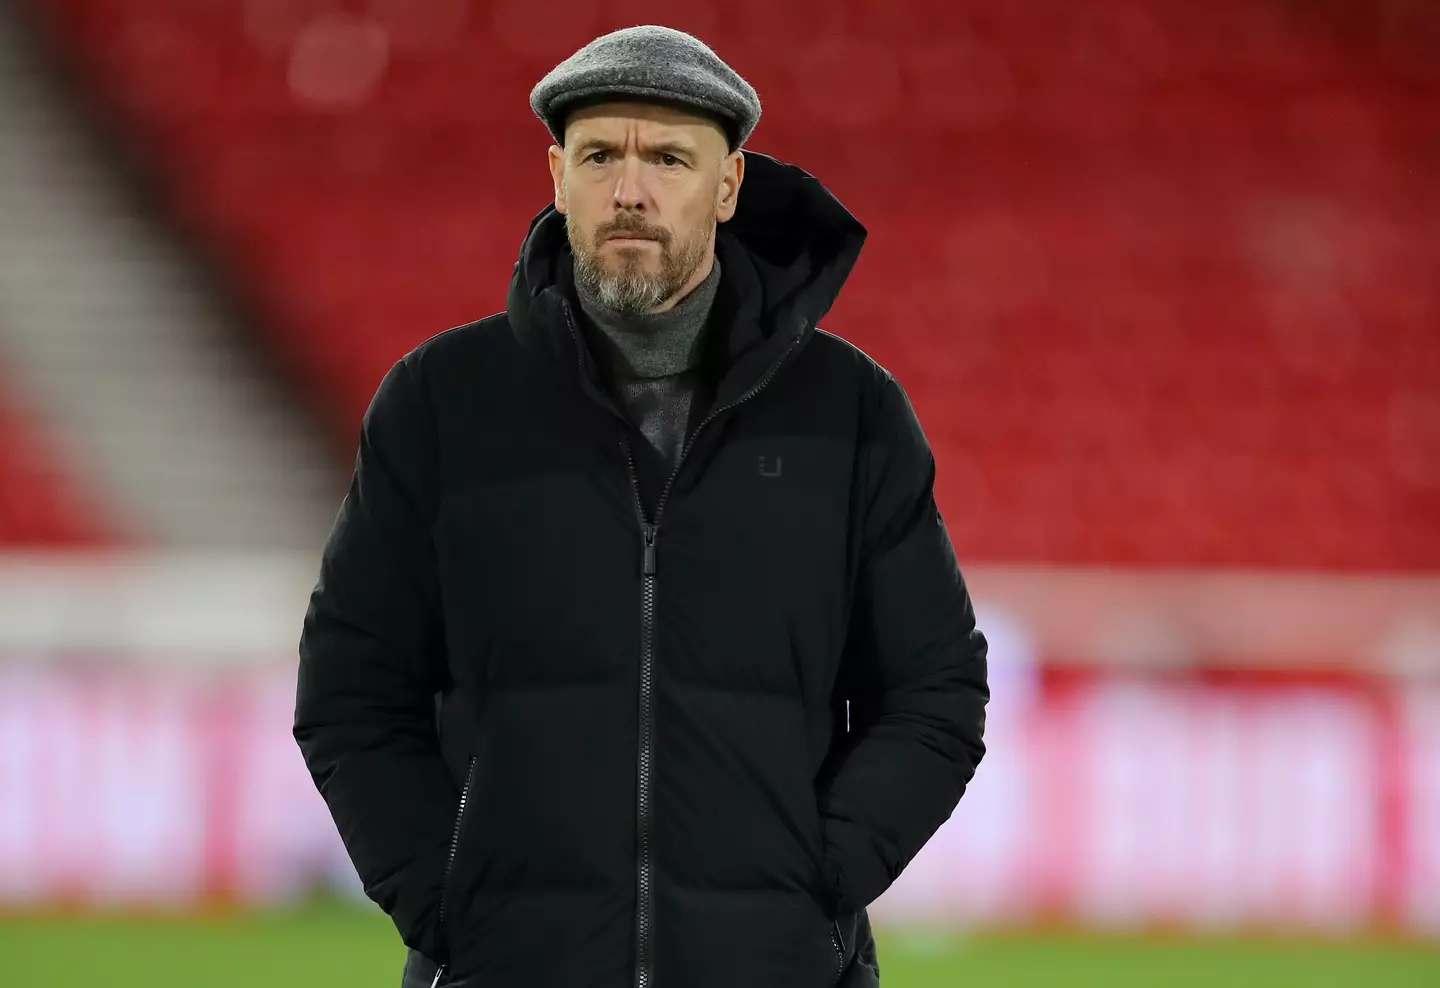 Ten Hag has said he is 'happy' with his current squad. (Image